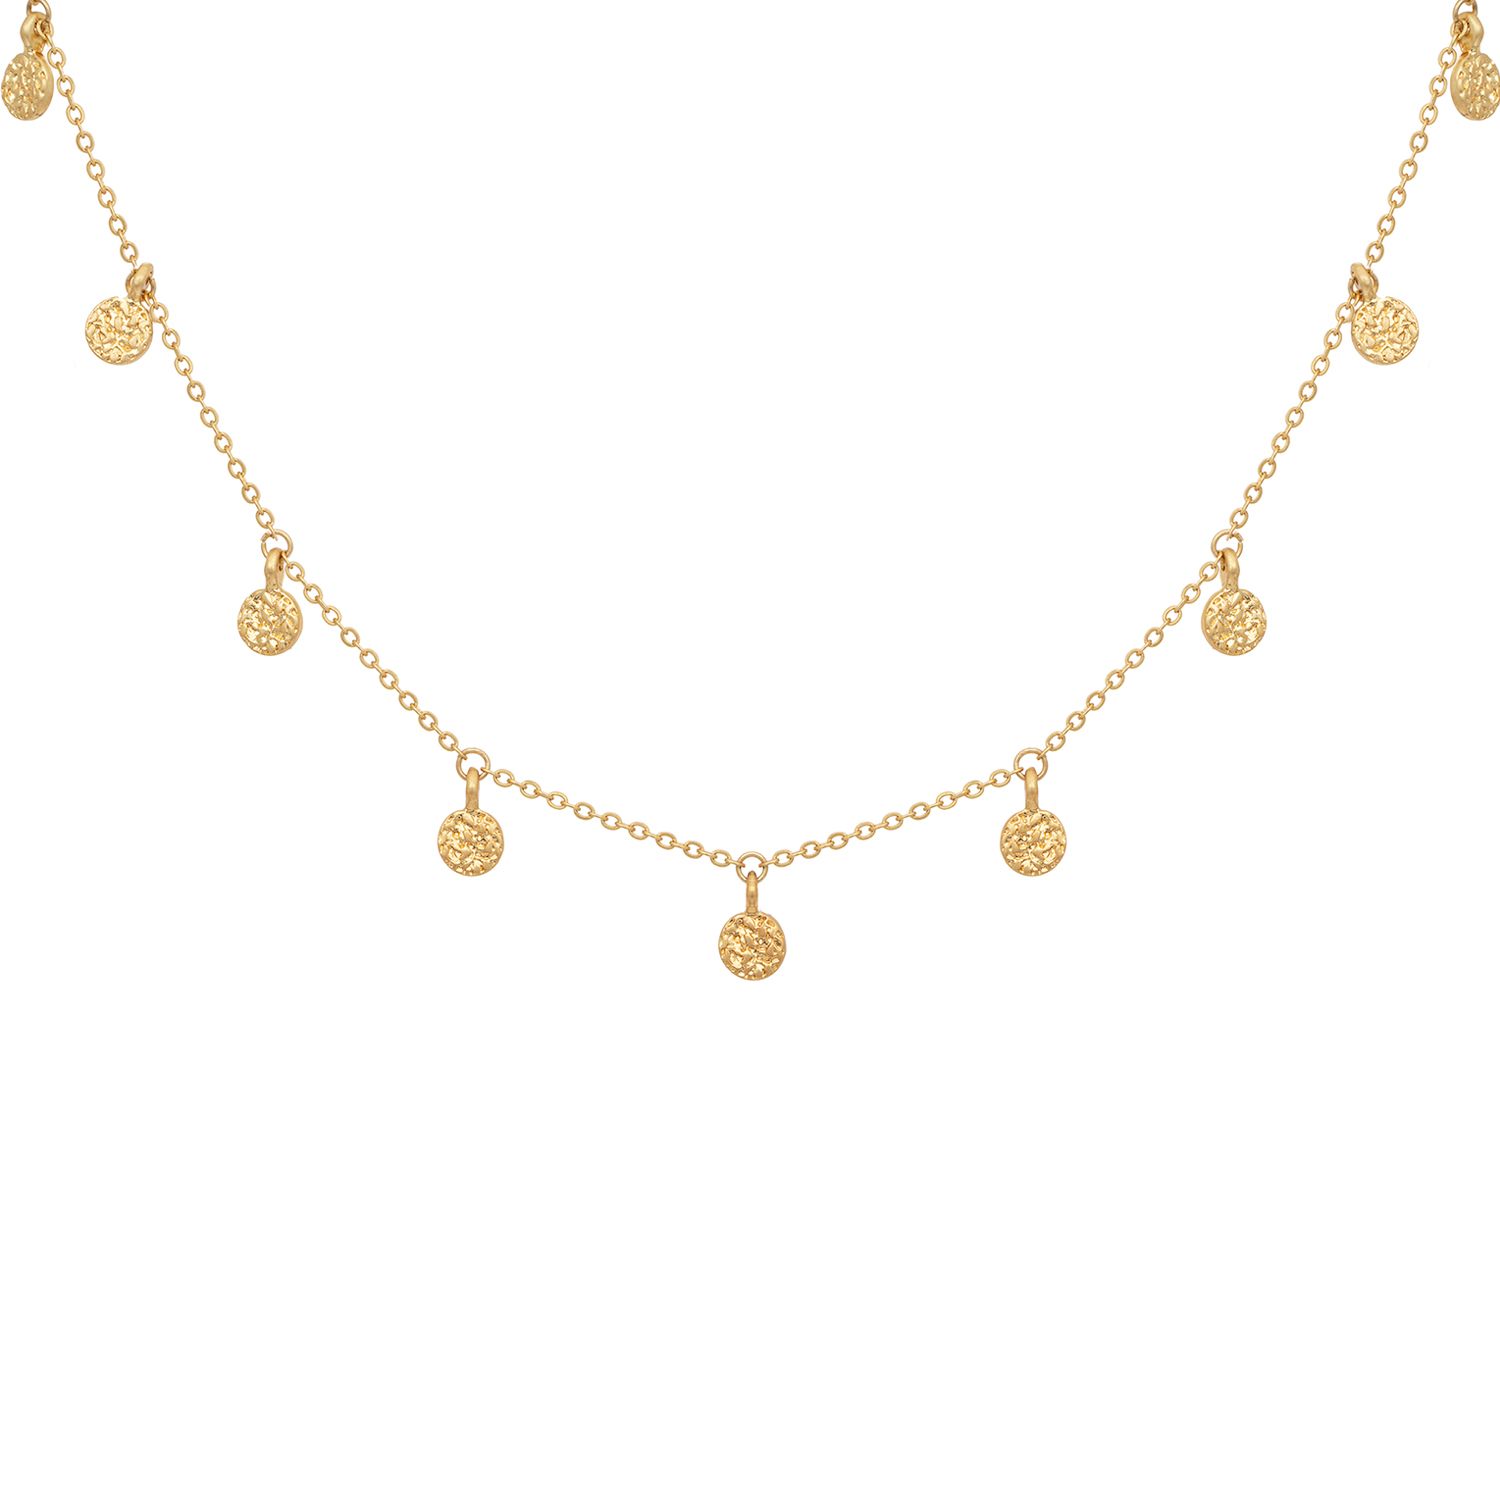 If you love your boho jewellery, this one's for you. It features a dainty gold choker with miniature coins that dance across your neck! The gold plated necklace features hammered gold detailing and looks amazing layered with another longer necklace with a low neckline outfit, or over the top of a jumper during the day! It measures 15 inches and comes with a lobster clasp fastening and 3 inch extender. The Boho choker necklace is designed by Kate Thornton as a classic piece that you can wear with so many looks!